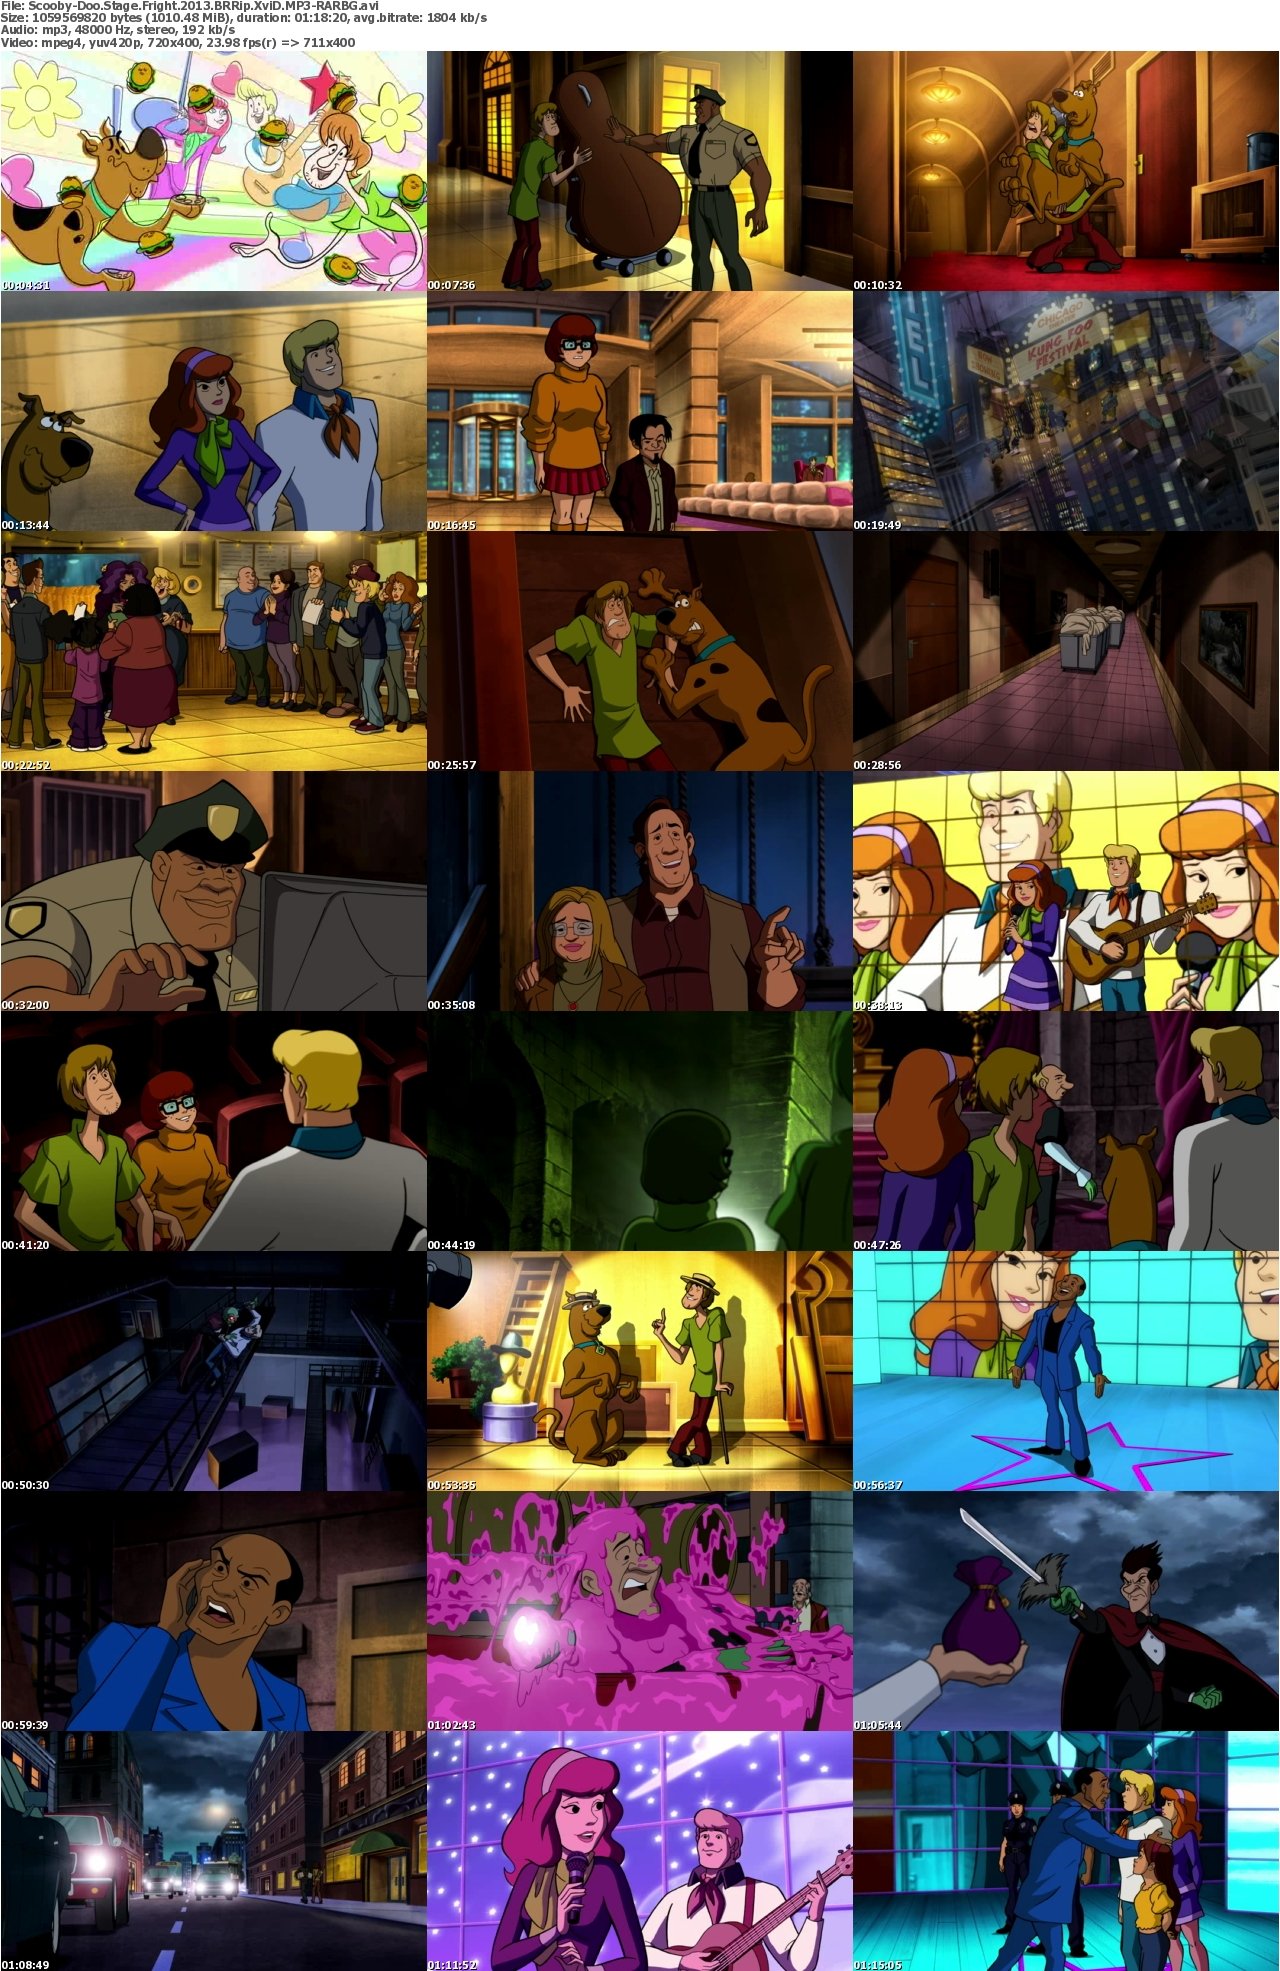 2013 Scooby-Doo! Stage Fright